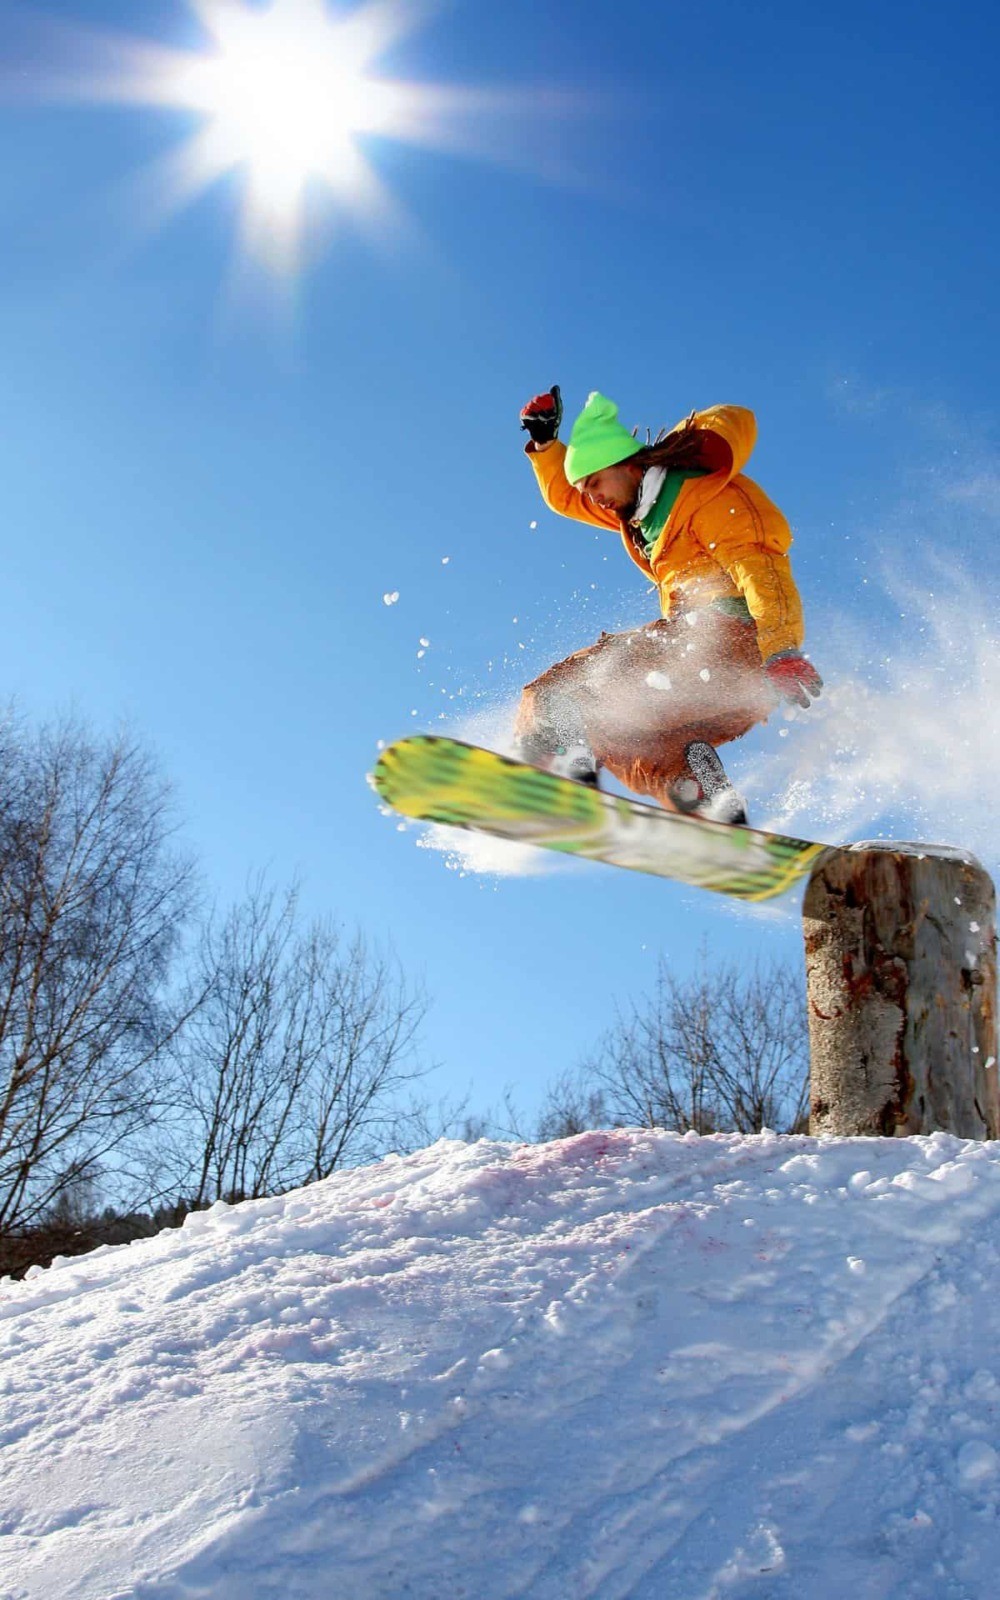 Footwear for the Slopes: Top Picks for the Best Snowboarding Boots